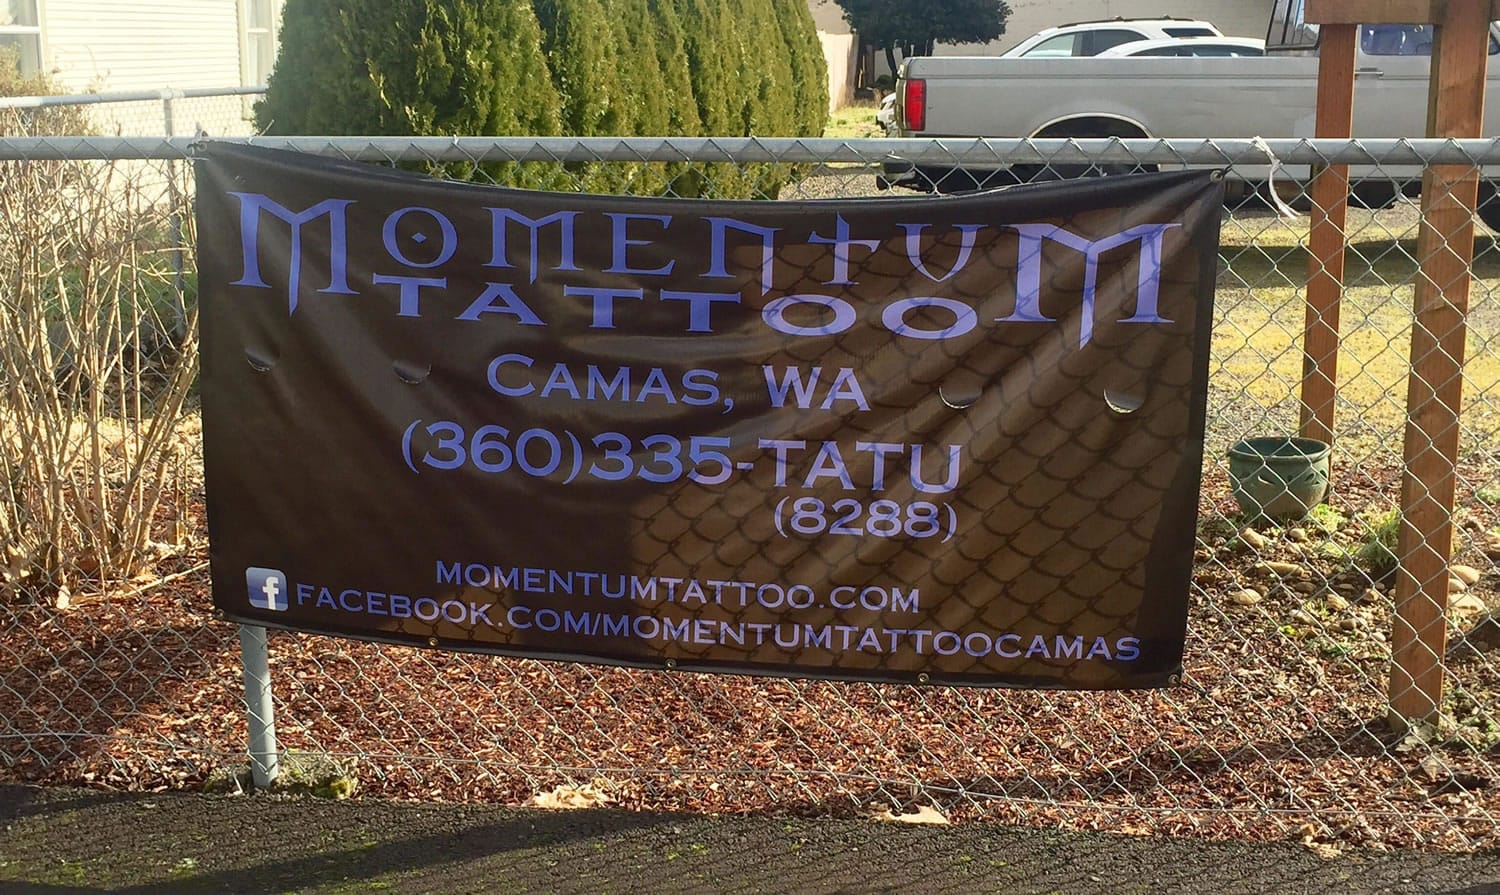 James Hoffman, the owner of Momentum Tattoo in Camas, and an employee, Billy Beadle, were arrested and booked at the Clark County Jail following a Wednesday shooting at the tattoo parlor. Police say the shooting was deliberately staged by the pair as part of a club initiation.